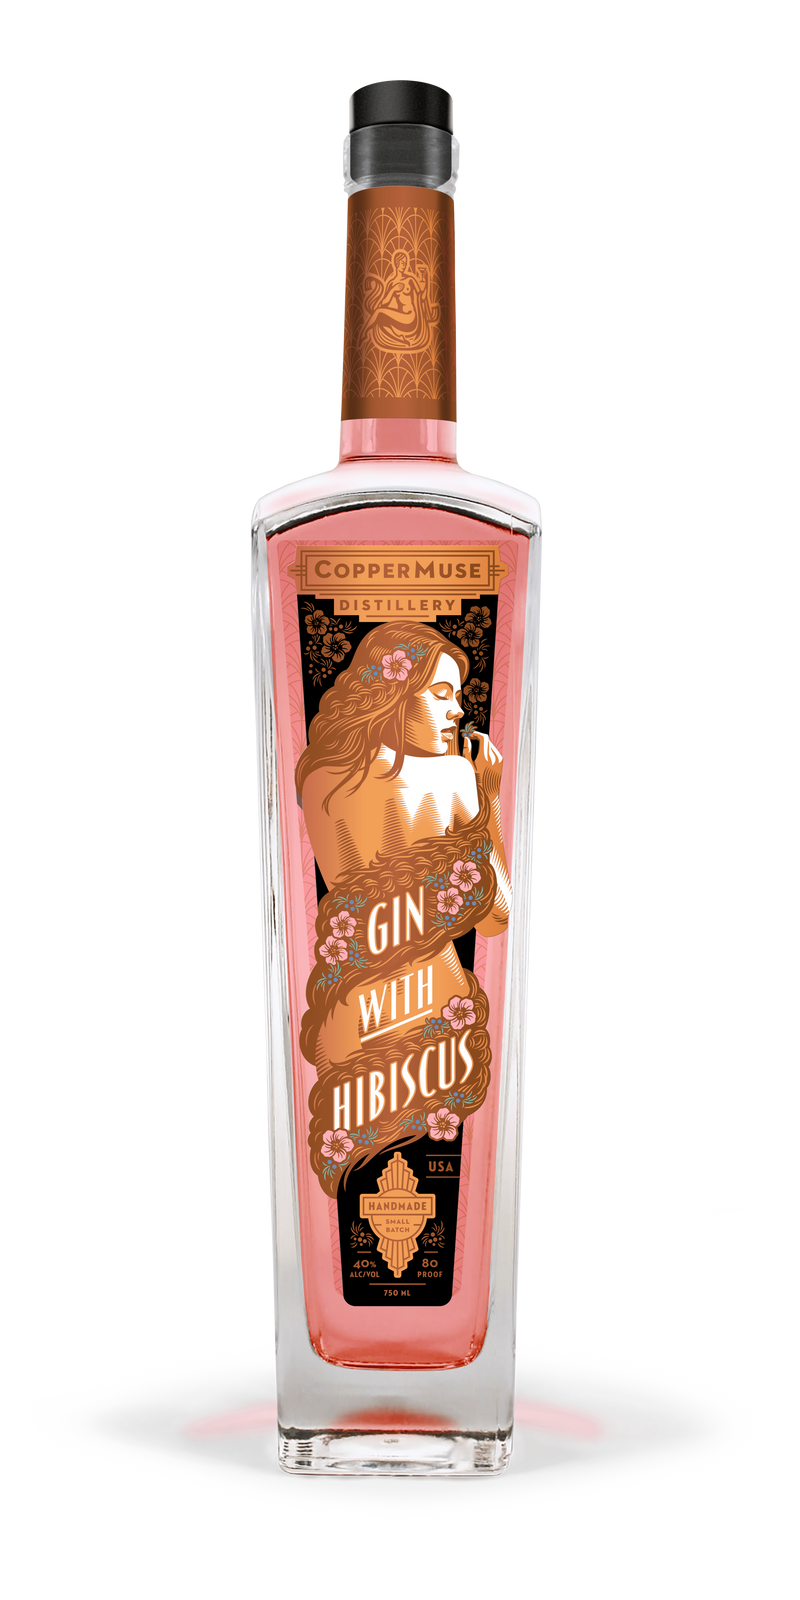 COPPERMUSE GIN WITH HIBISCUS